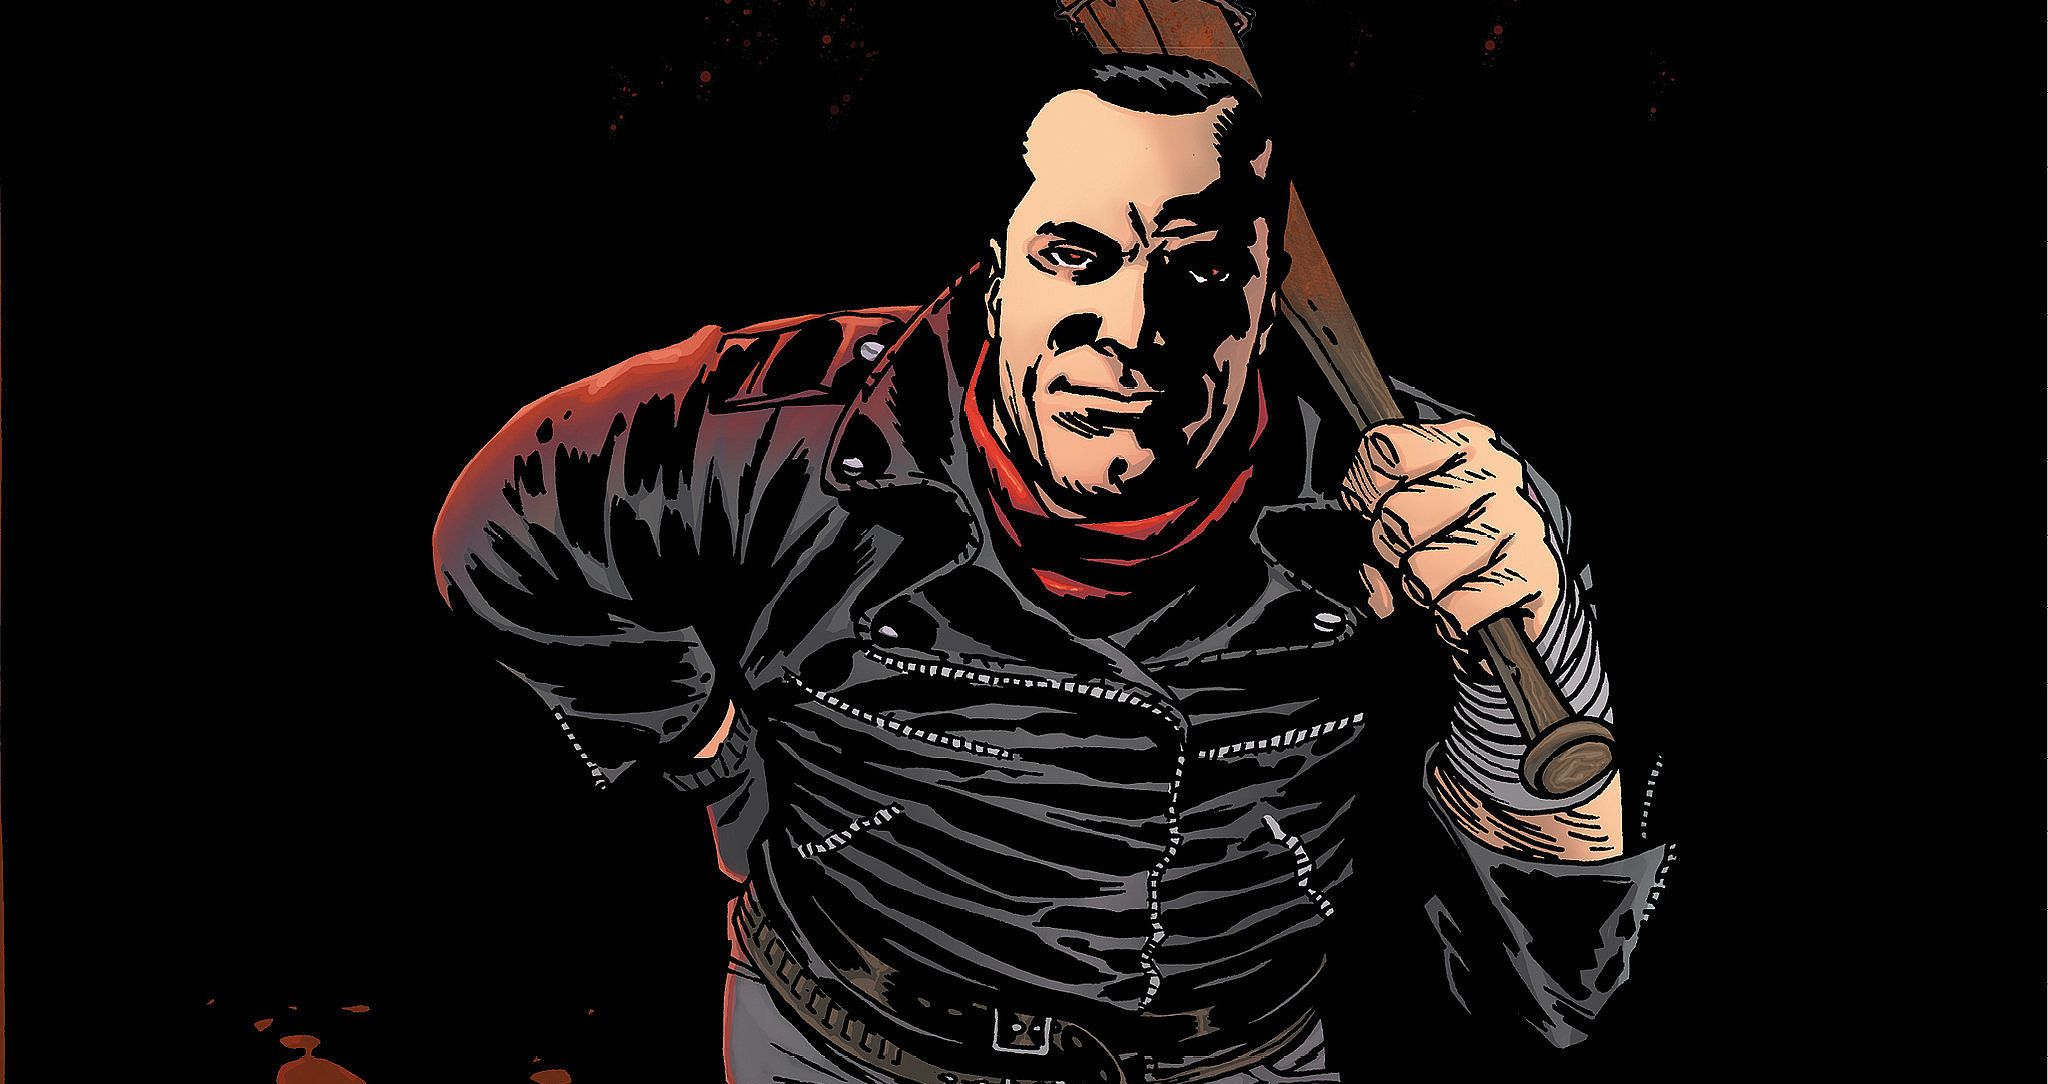 Negan from The Walking Dead 100 cover